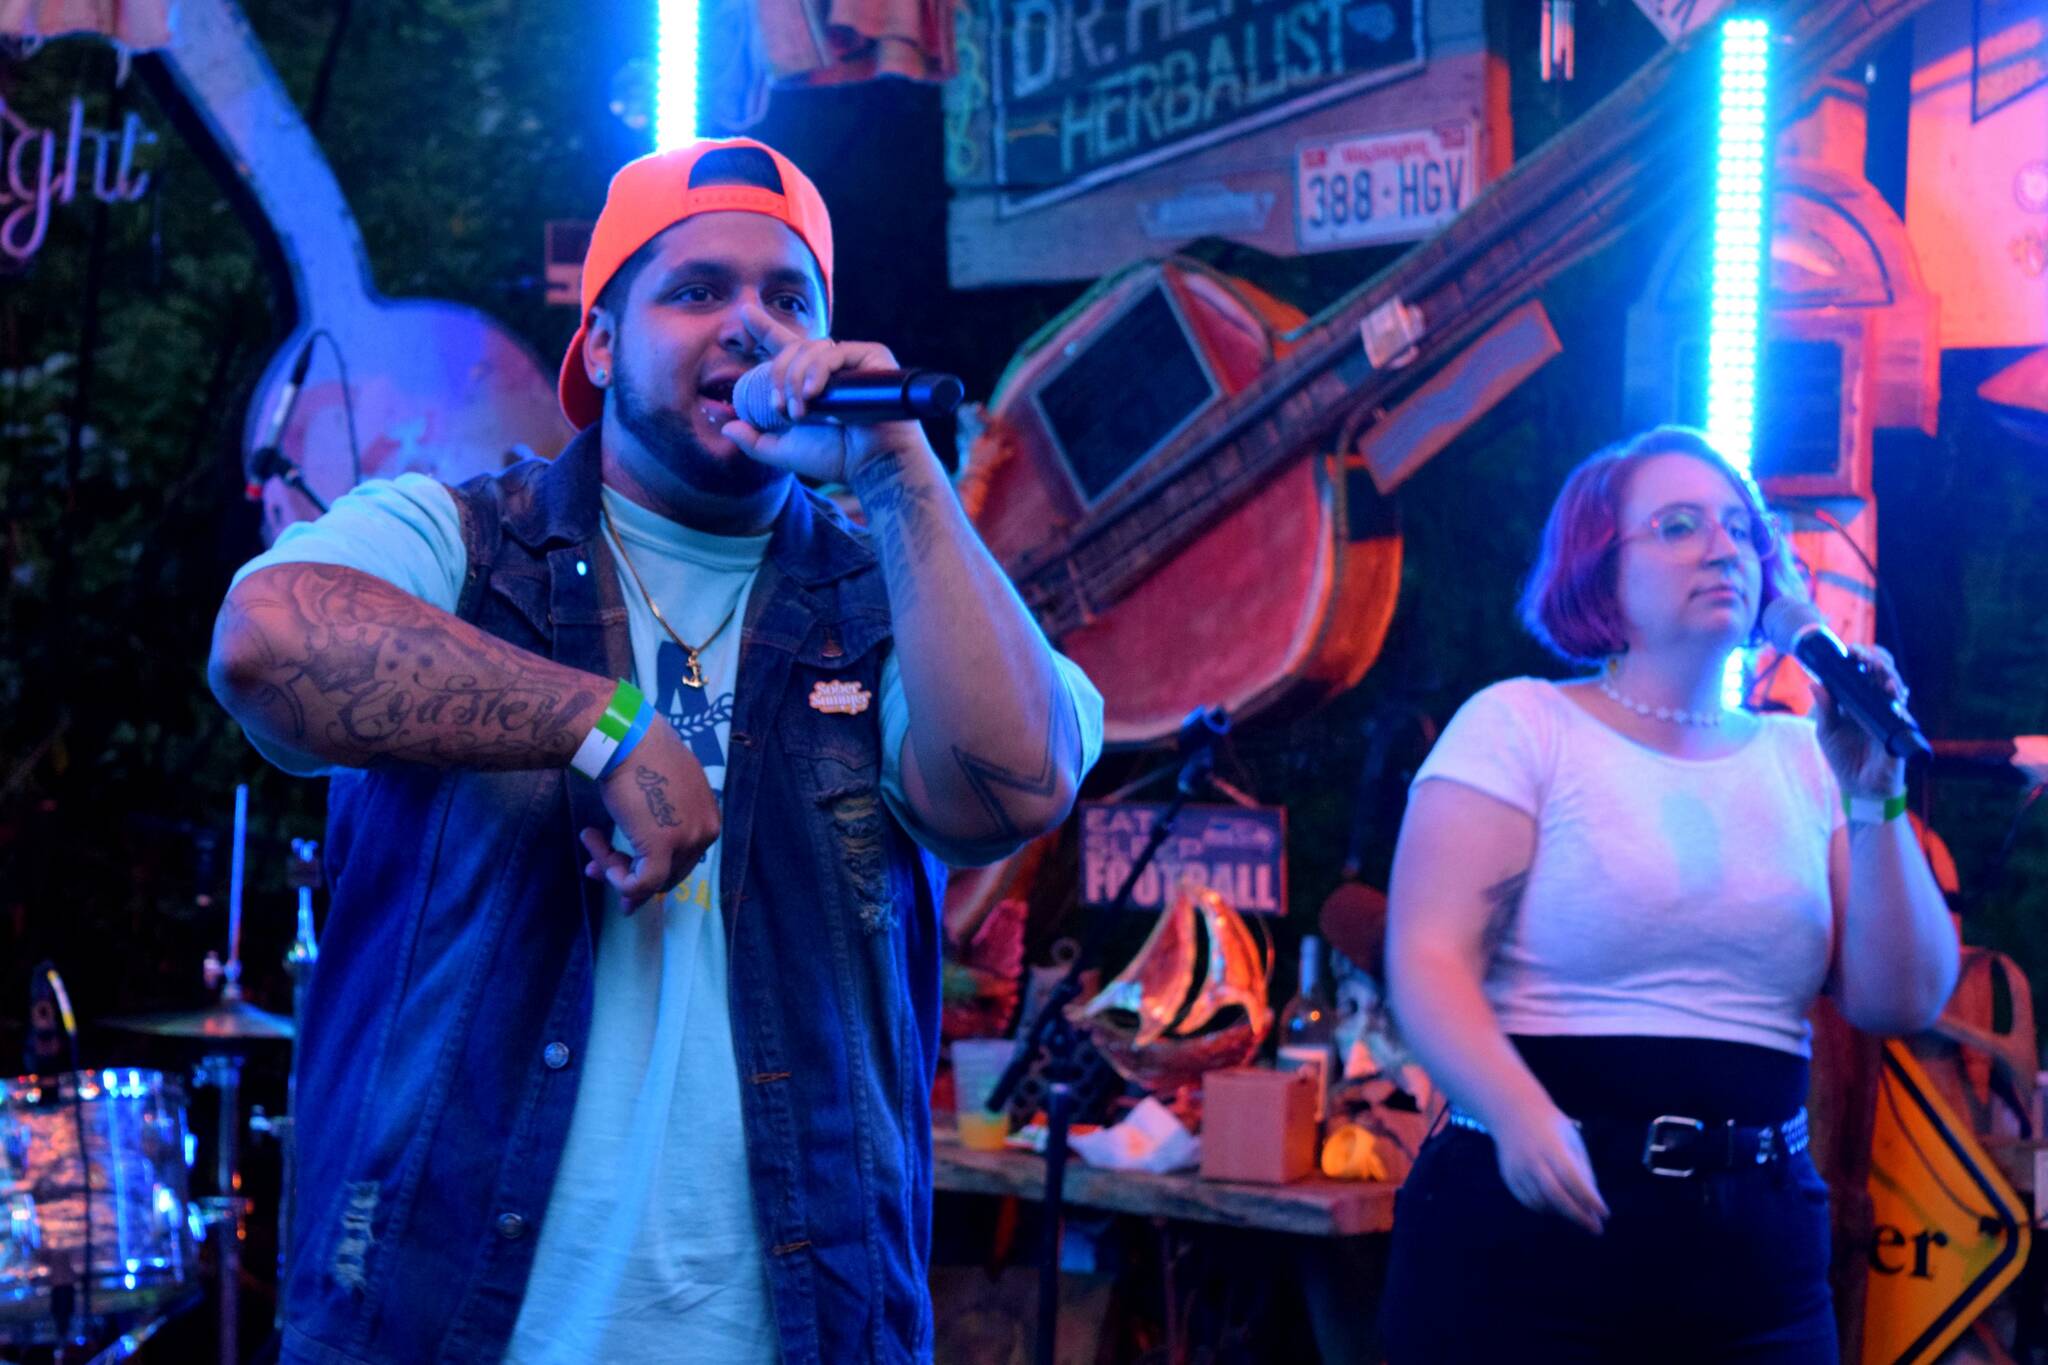 Selah-based rapper COASTER (l) performs song “Vibe with Me” with Kaylee Jorene.